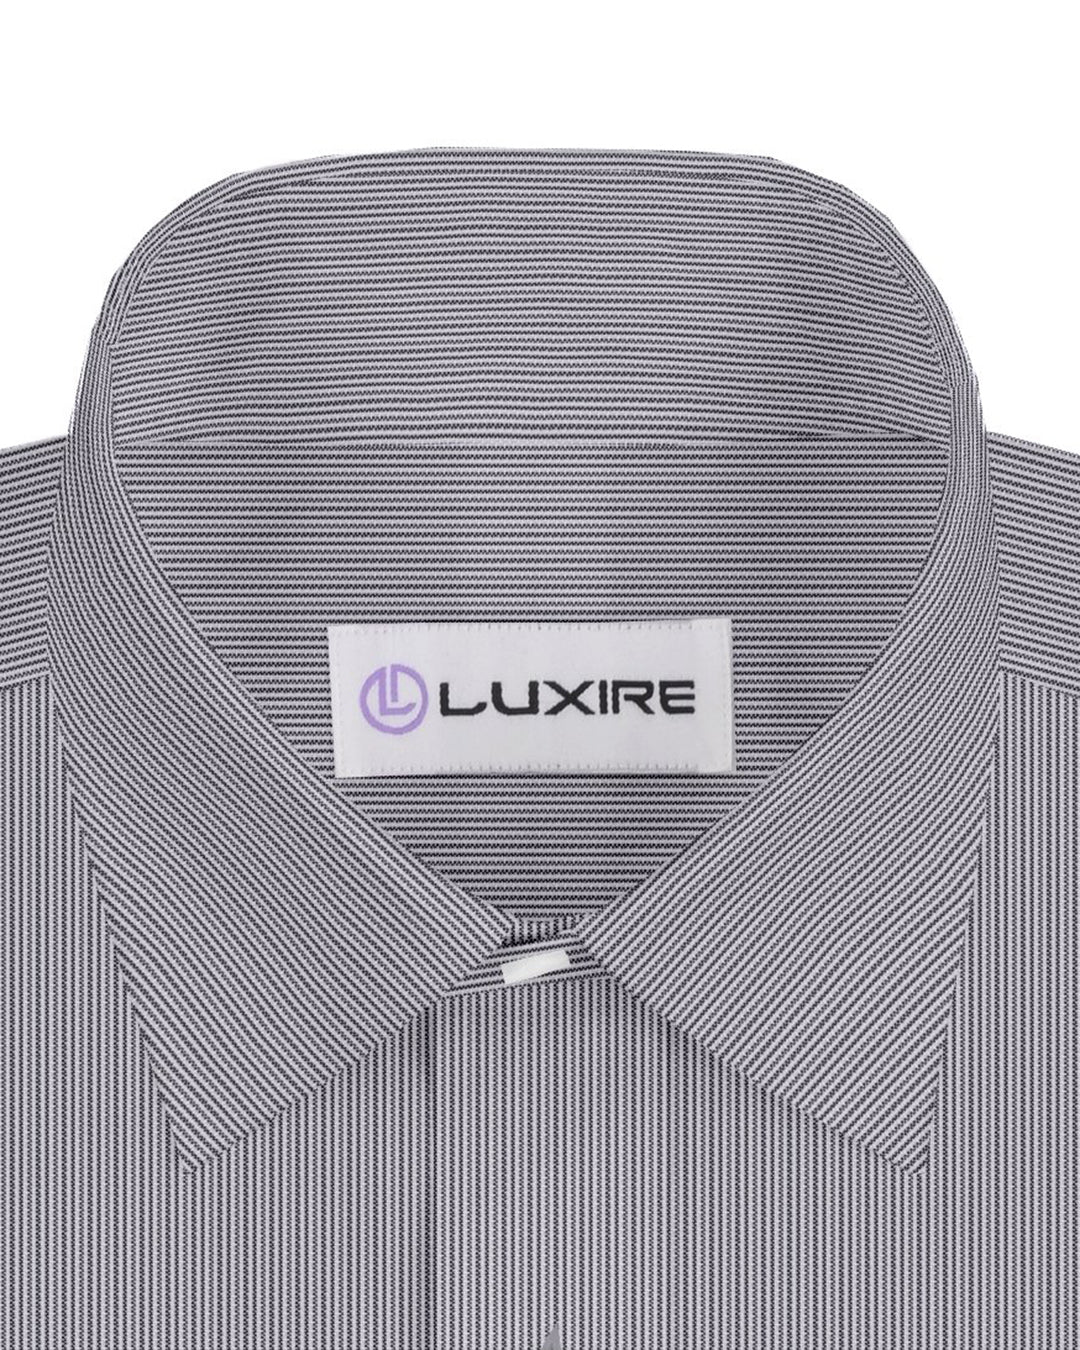 Collar of the custom linen shirt for men in black and white dress stripes by Luxire Clothing